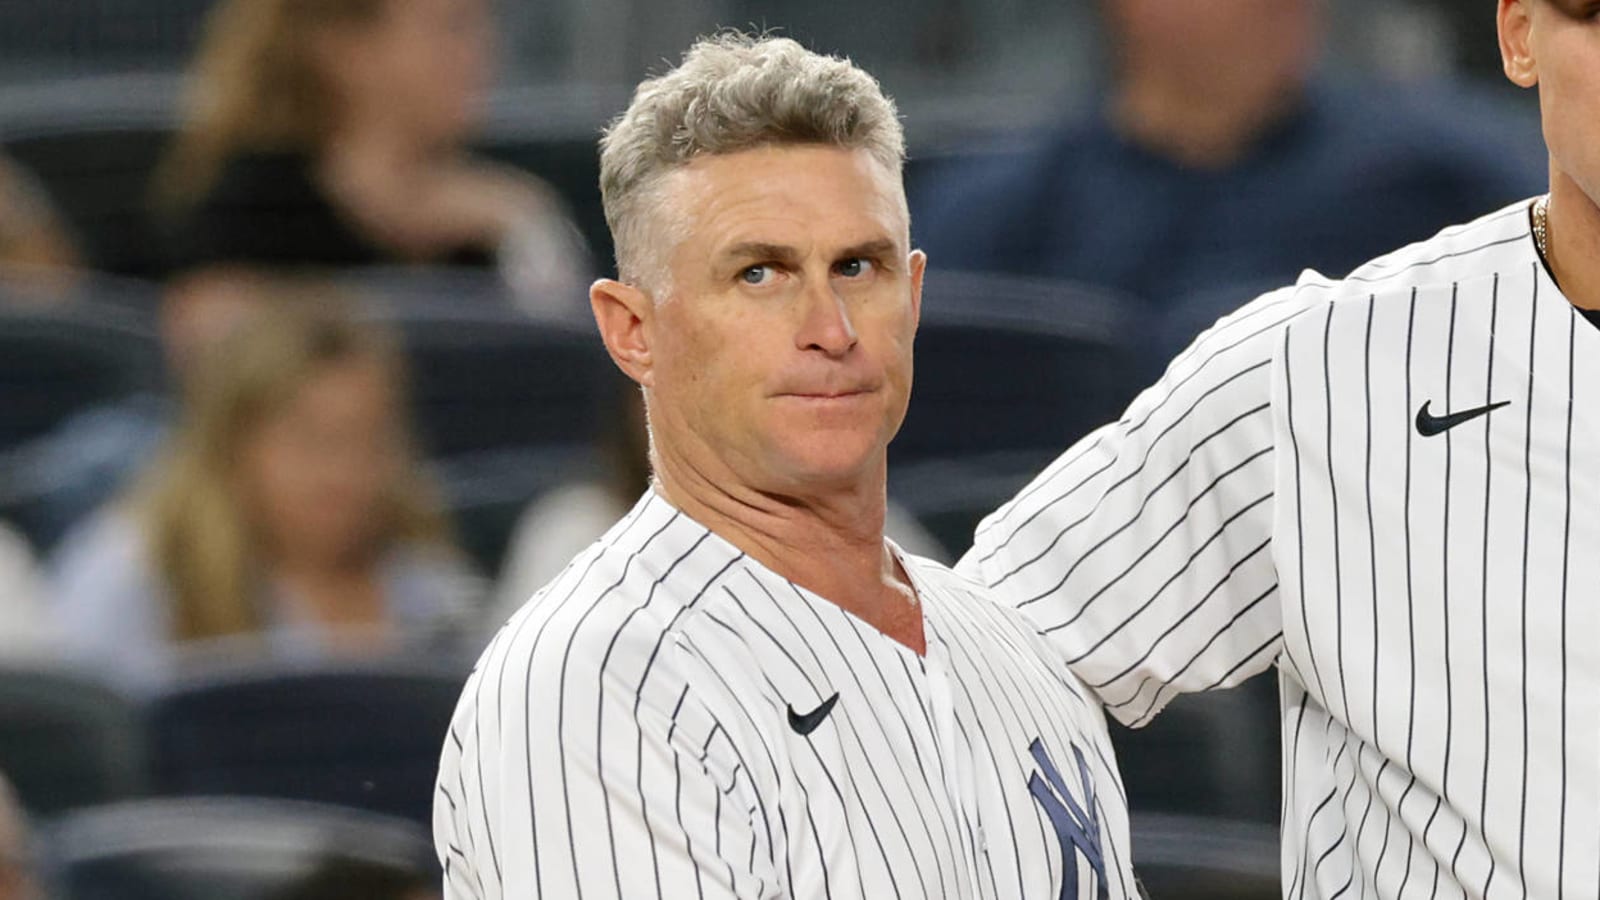 Yankees 3B coach Phil Nevin takes heat over costly decision